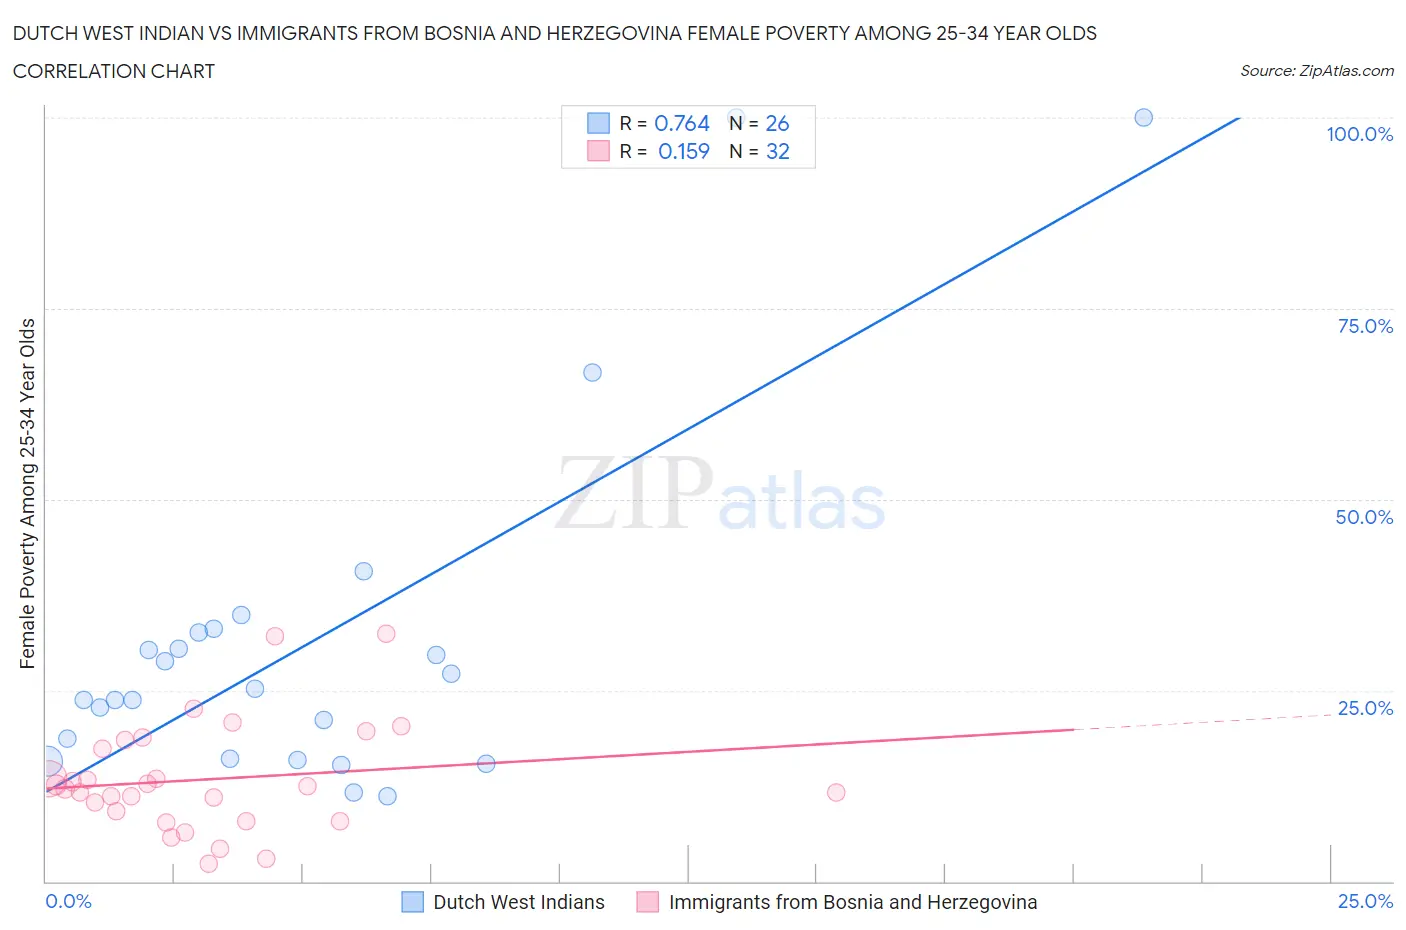 Dutch West Indian vs Immigrants from Bosnia and Herzegovina Female Poverty Among 25-34 Year Olds